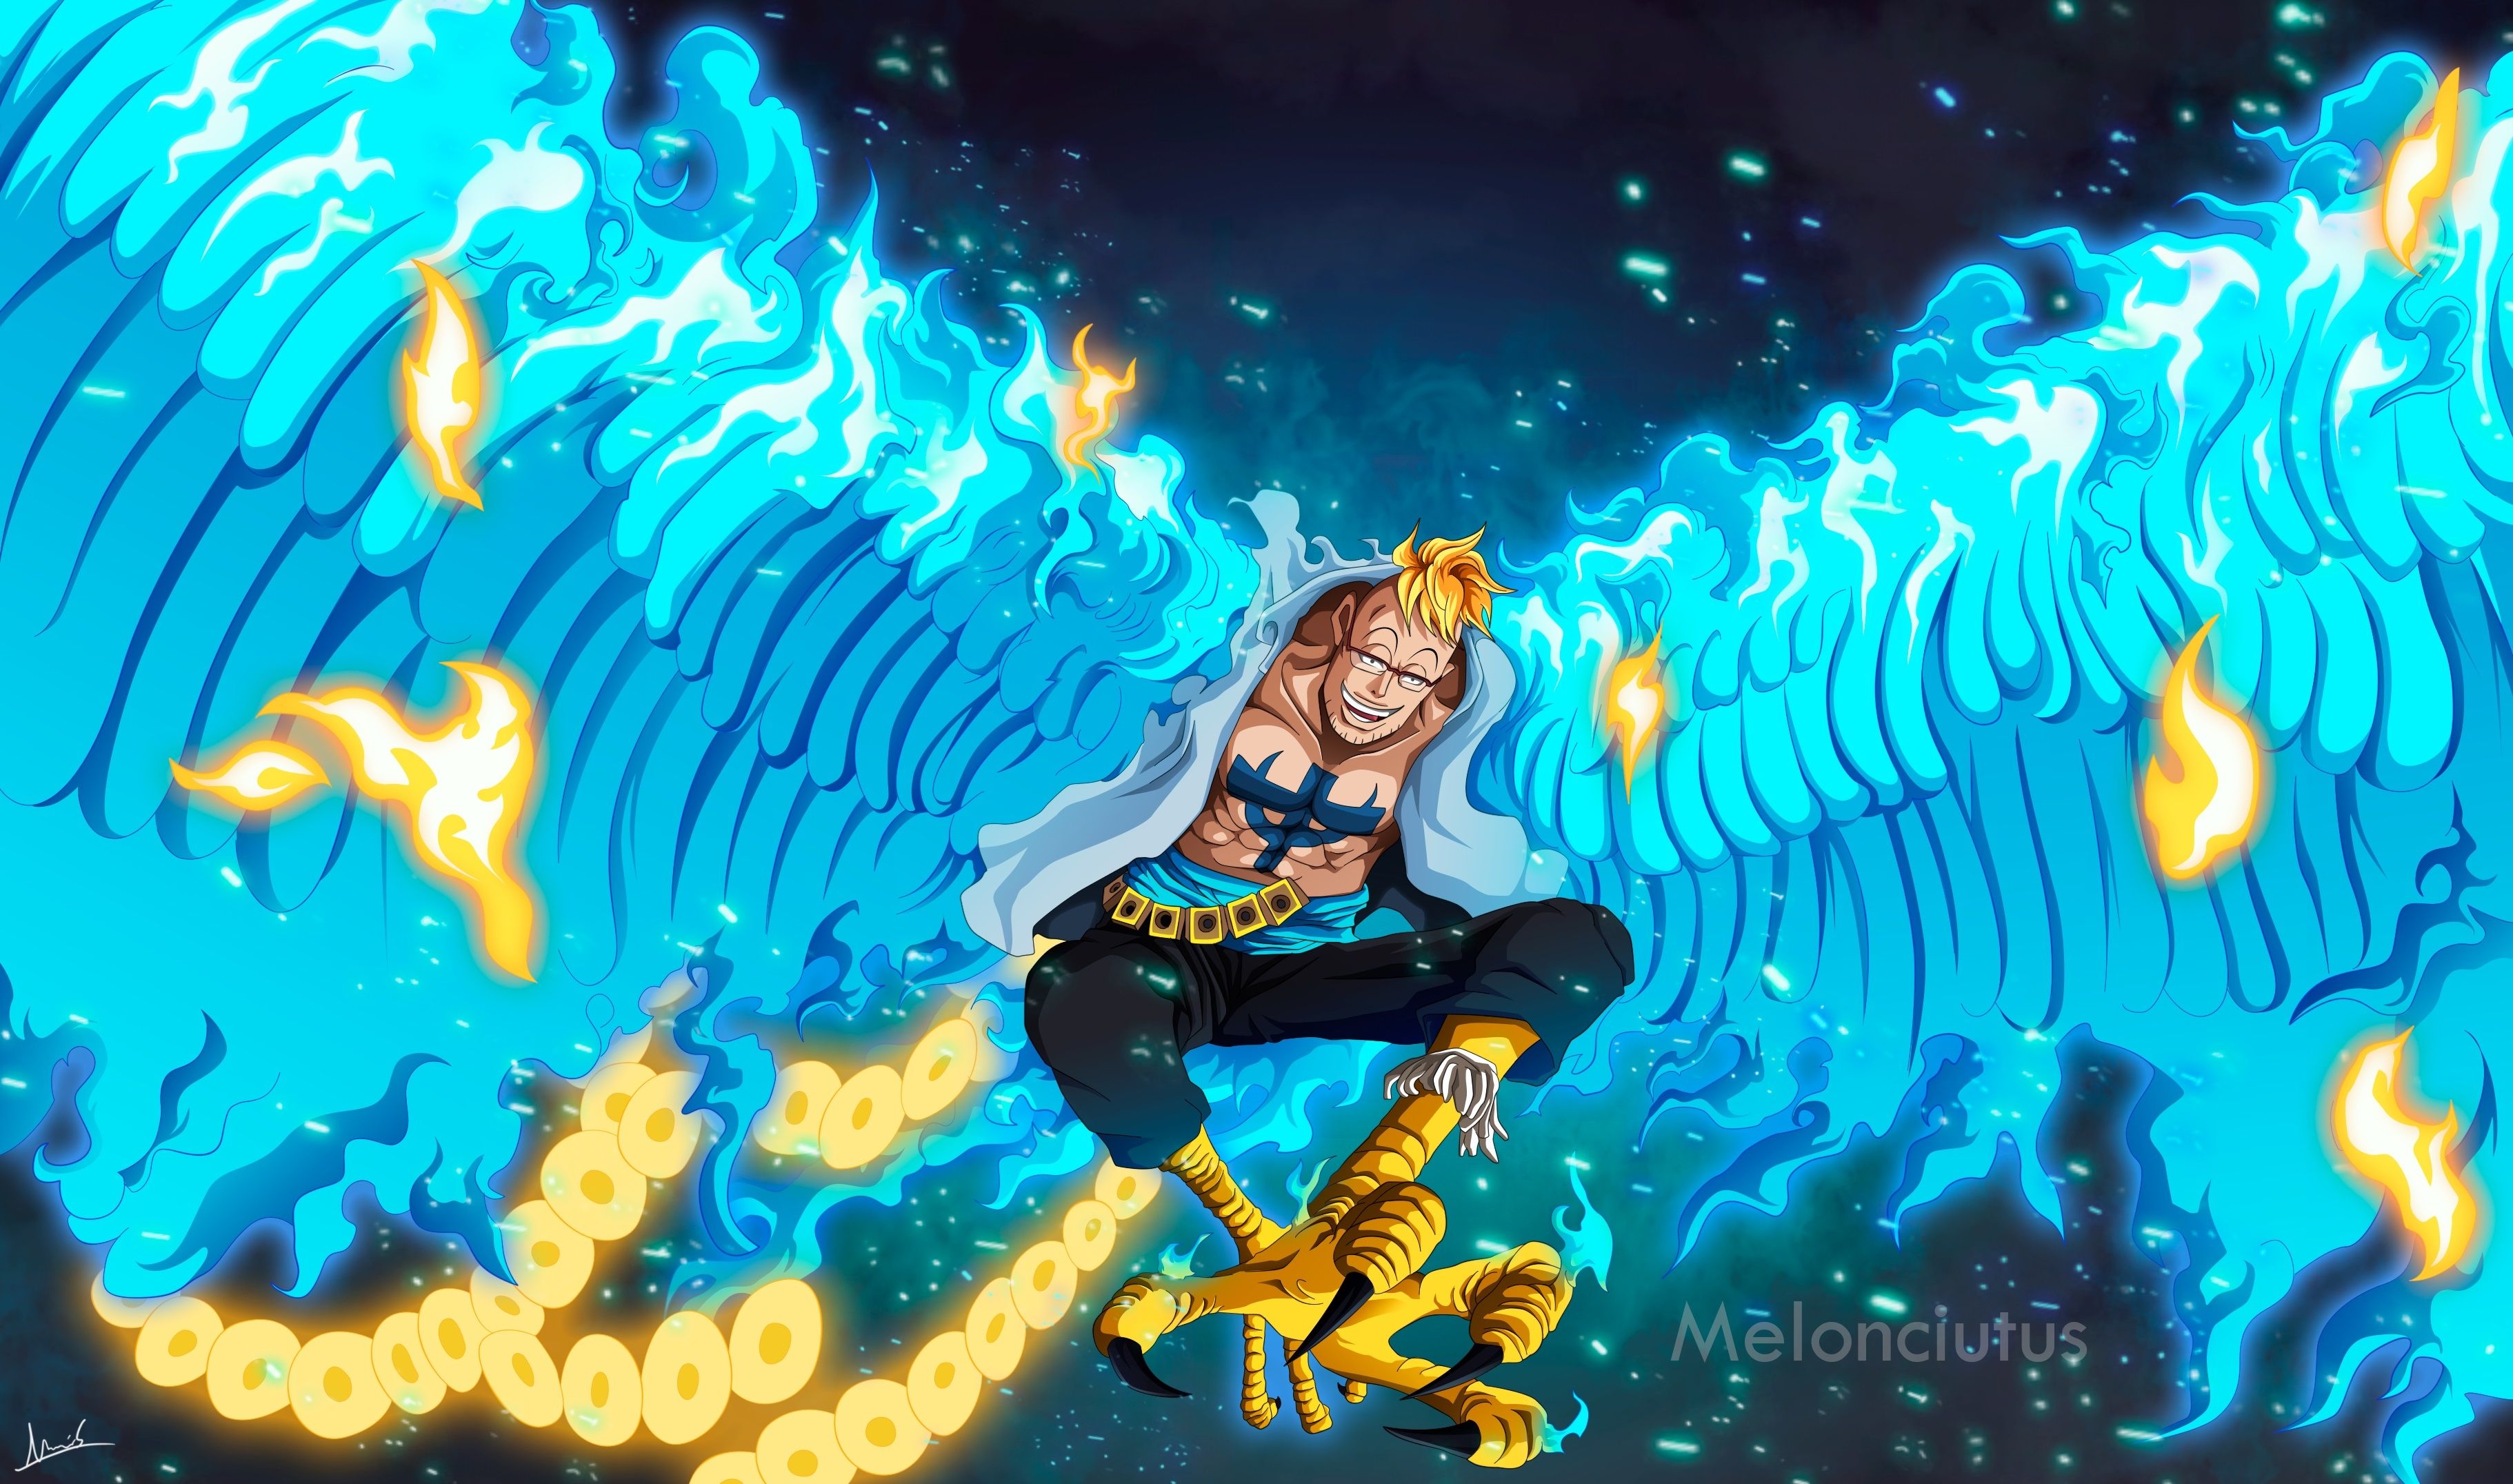 Marco One Piece Art Wallpaper, HD Anime 4K Wallpaper, Image, Photo and Background